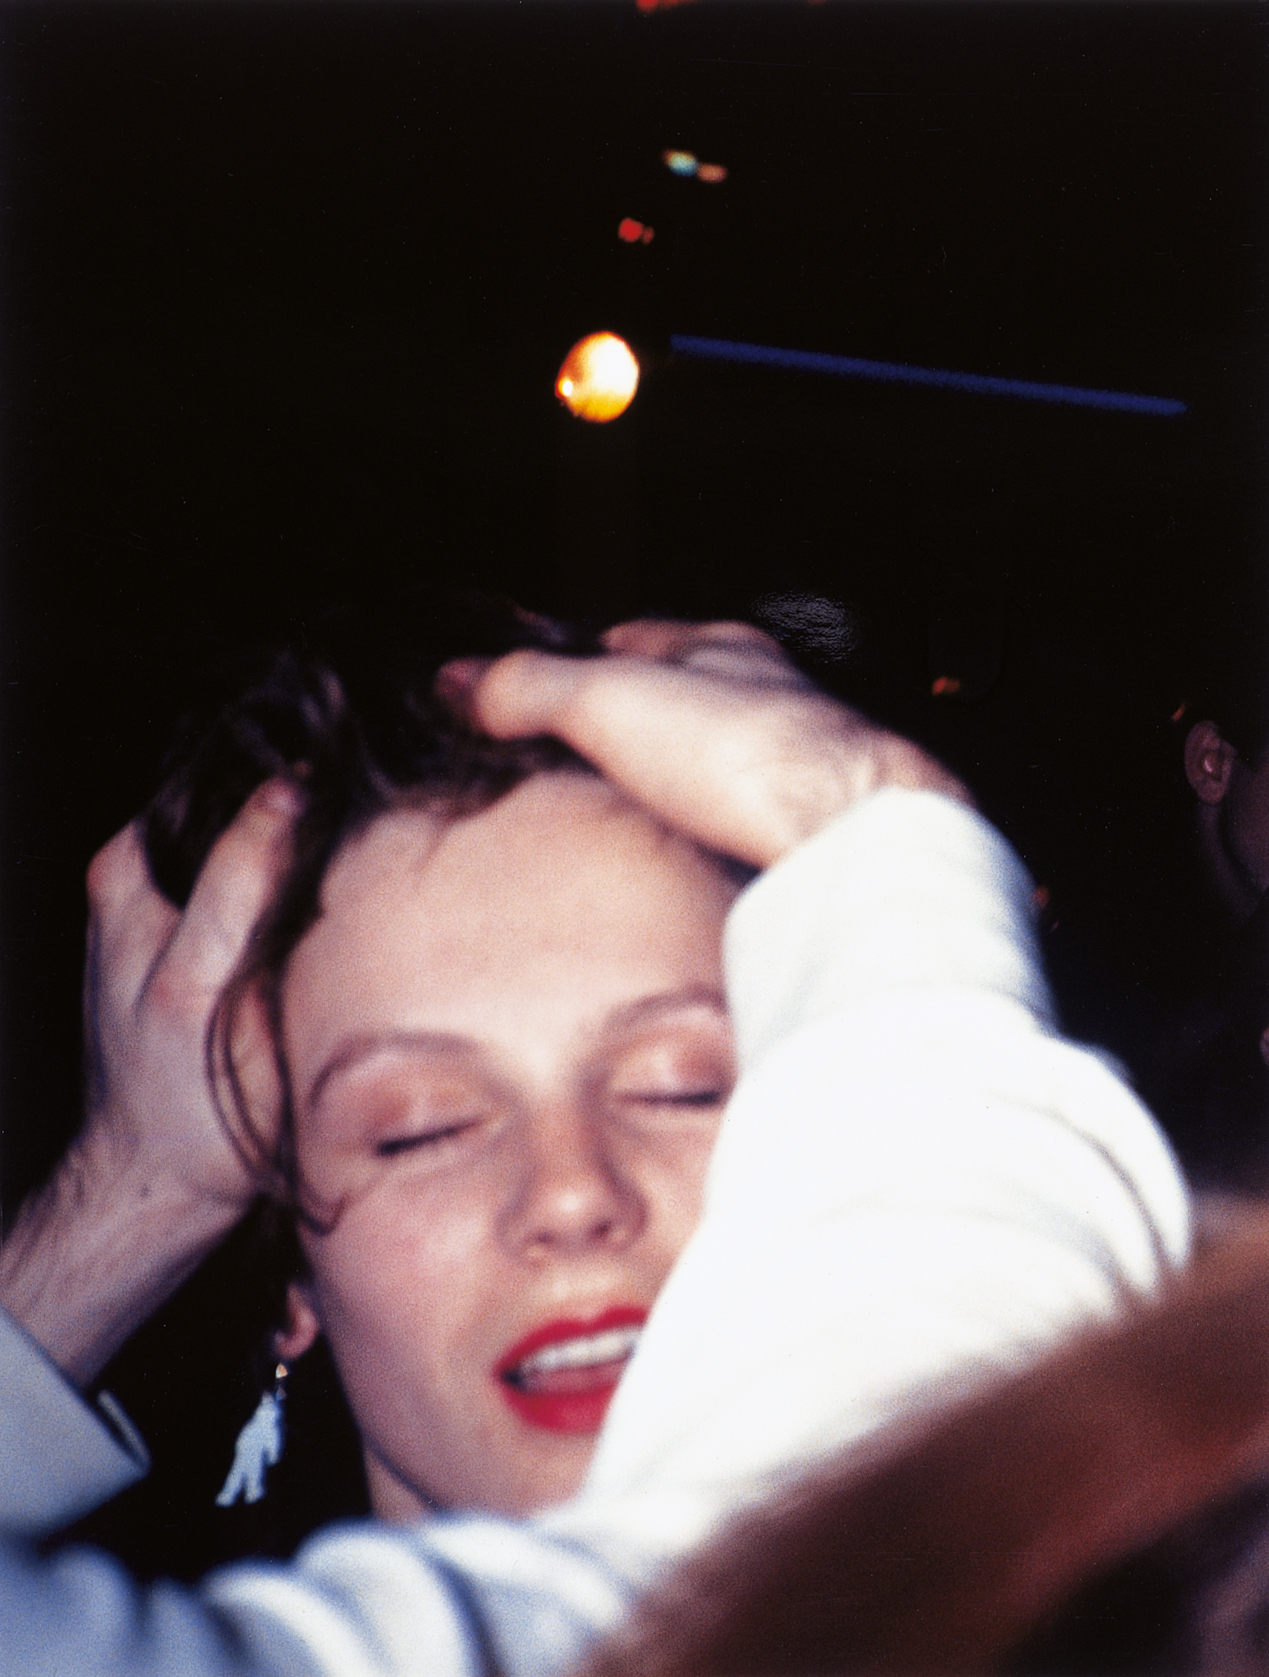 Love (Hands in Air), 1989 by Wolfgang Tillmans
